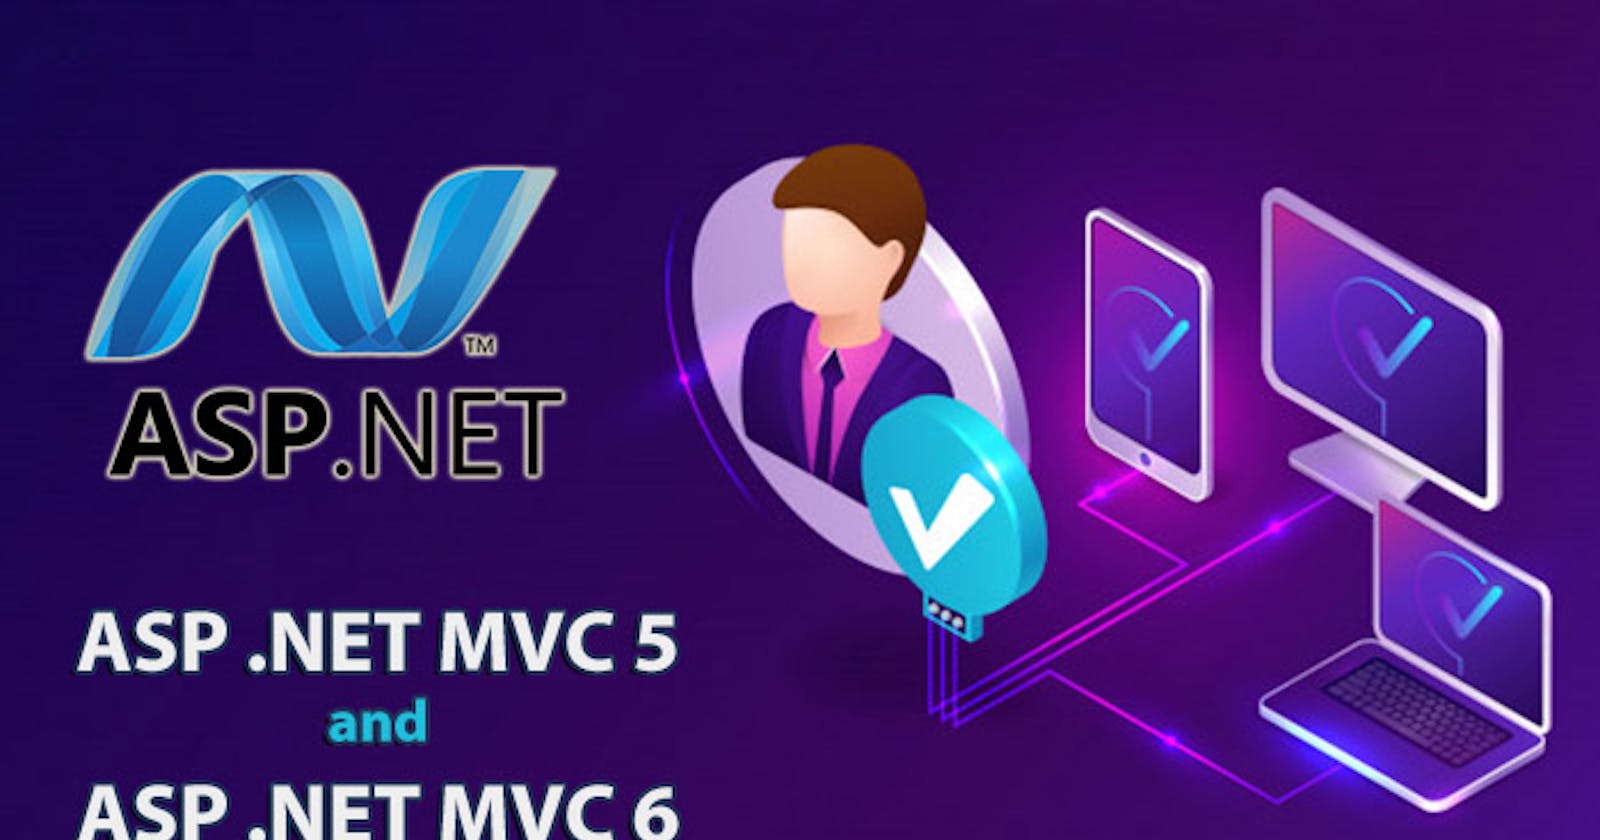 Differences between ASP.NET 5 and ASP.NET MVC 6